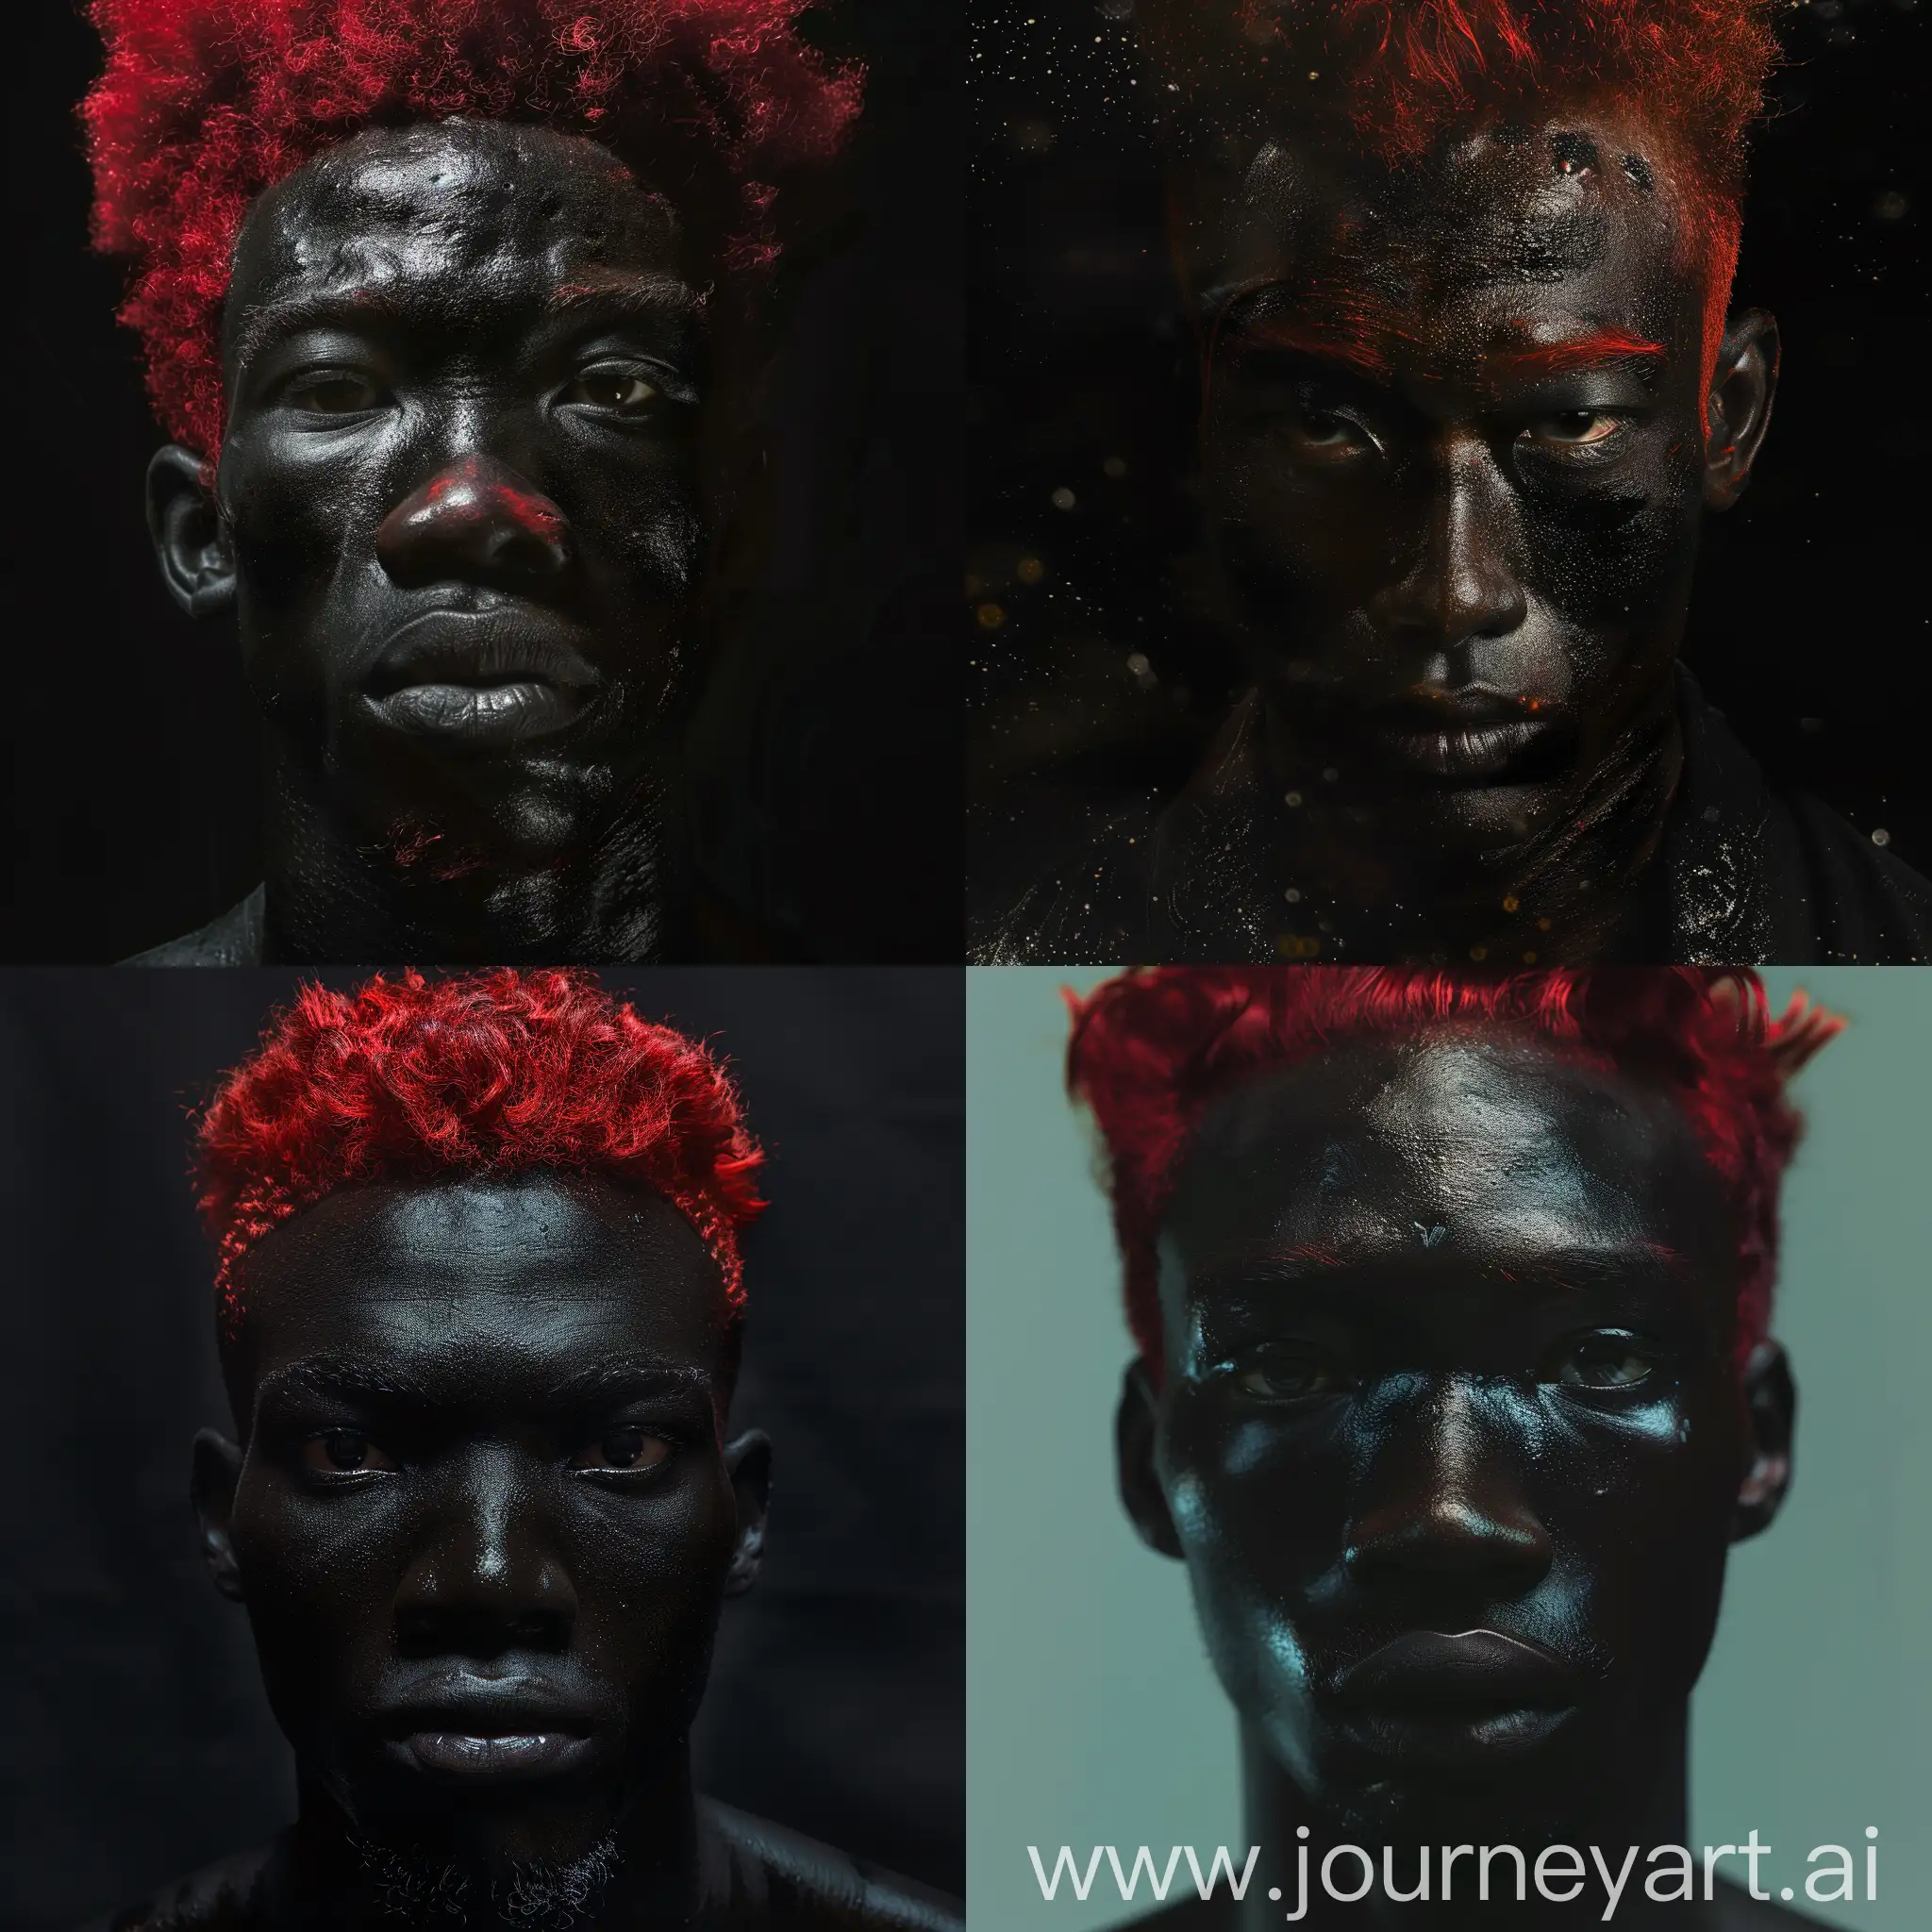 Portrait-of-a-Black-Man-with-Red-Hair-and-Chinese-Features